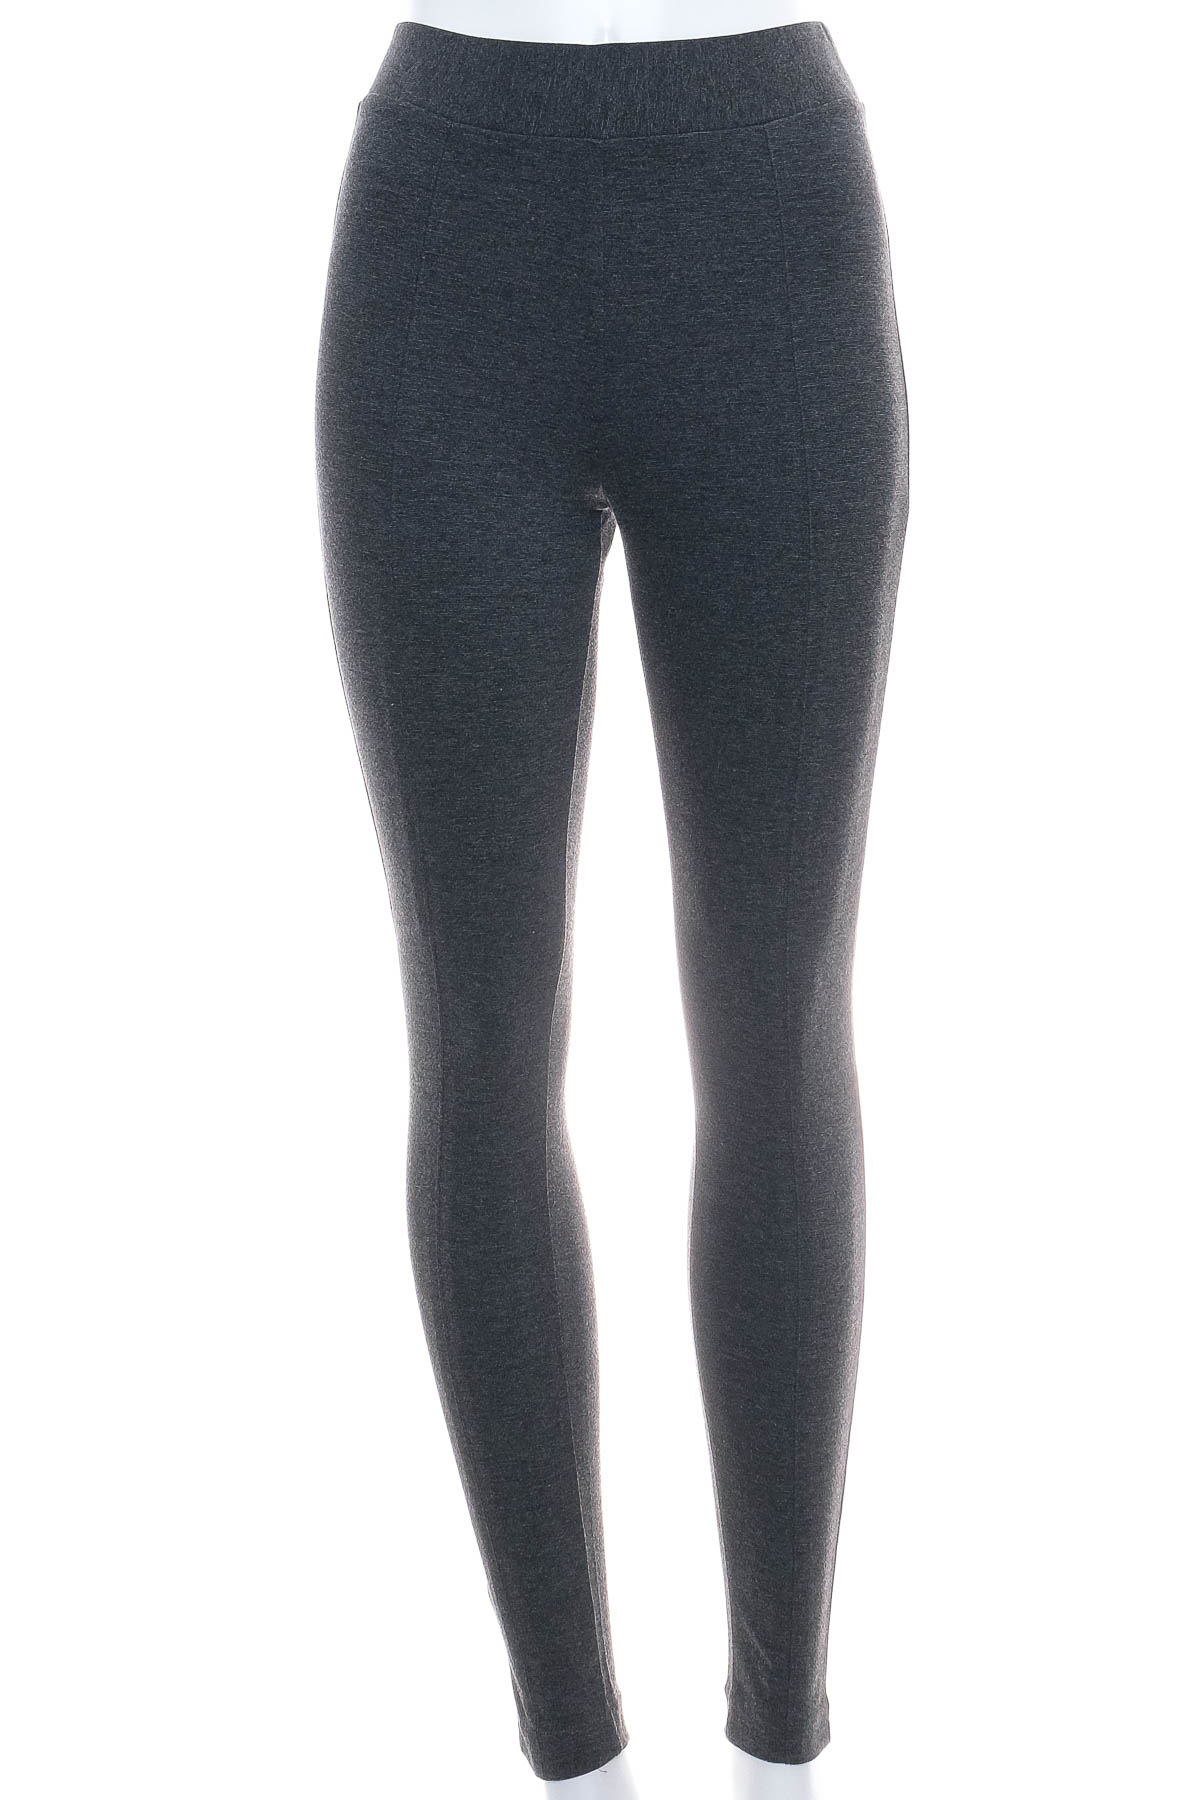 Leggings - M&S COLLECTION - 0